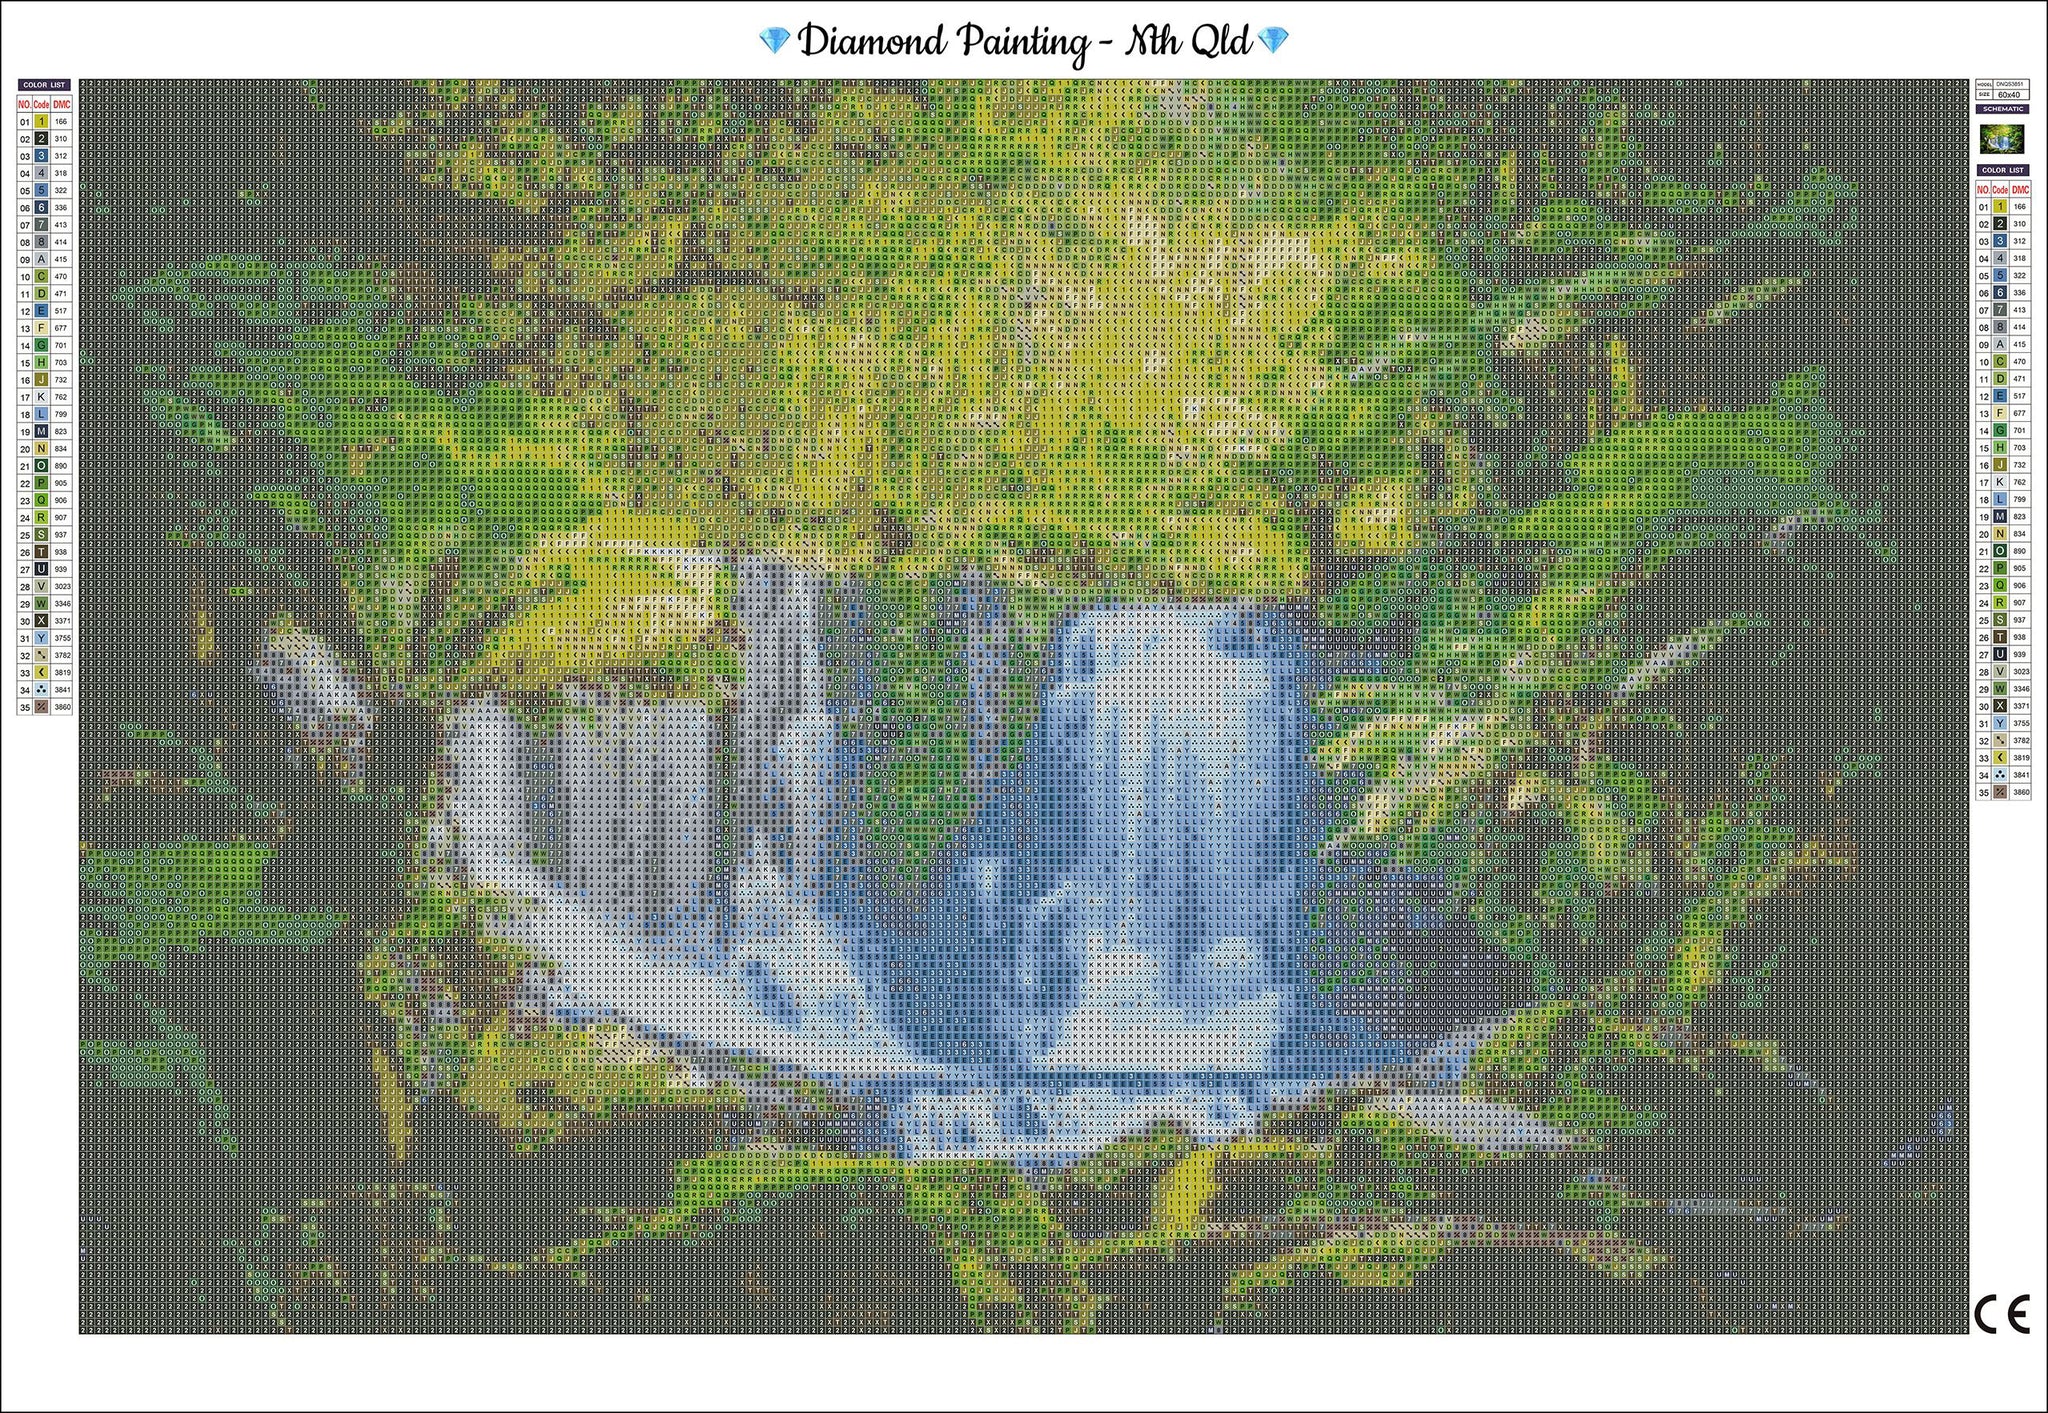 BEAUTIFUL WATERFALL AMIDST THE FORREST  - Full Drill Diamond Painting - 60cm x 40cm